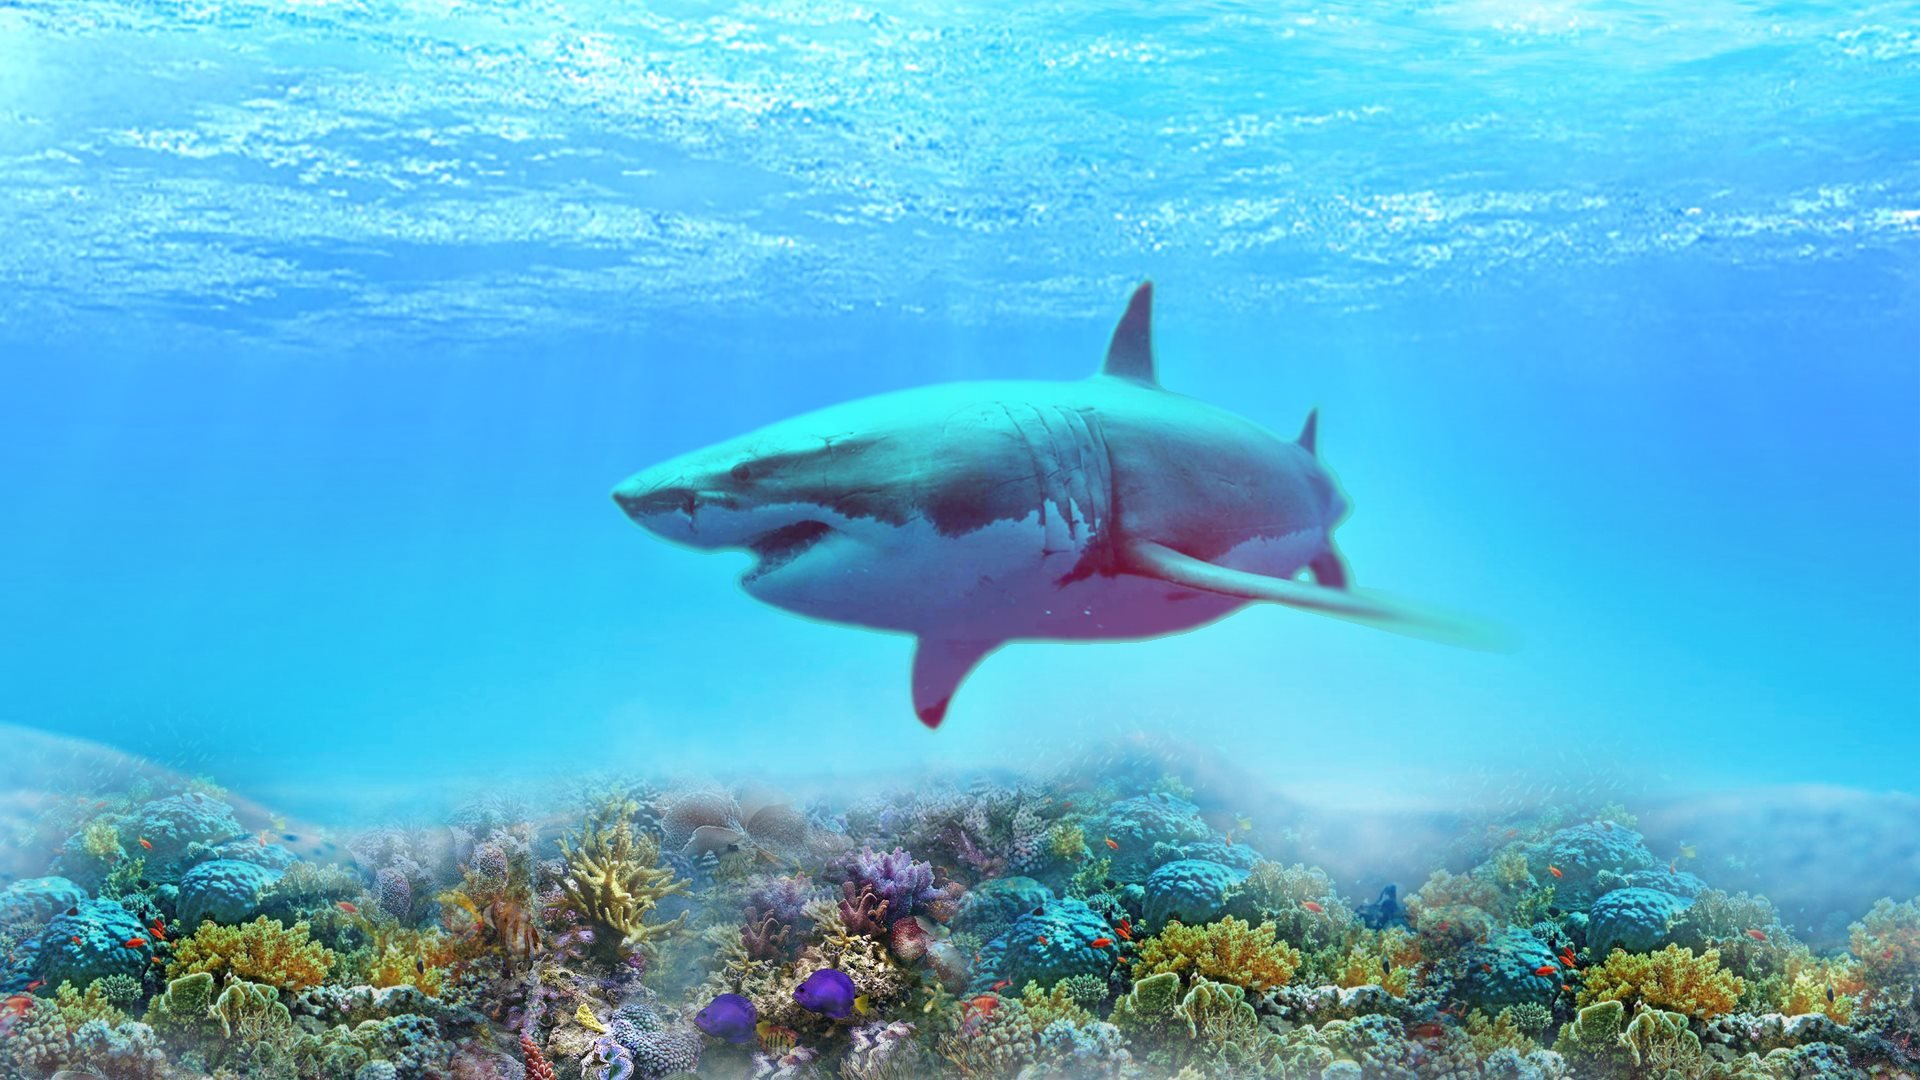 The Great White Shark HD Wallpapers 183 4K 1920x1080